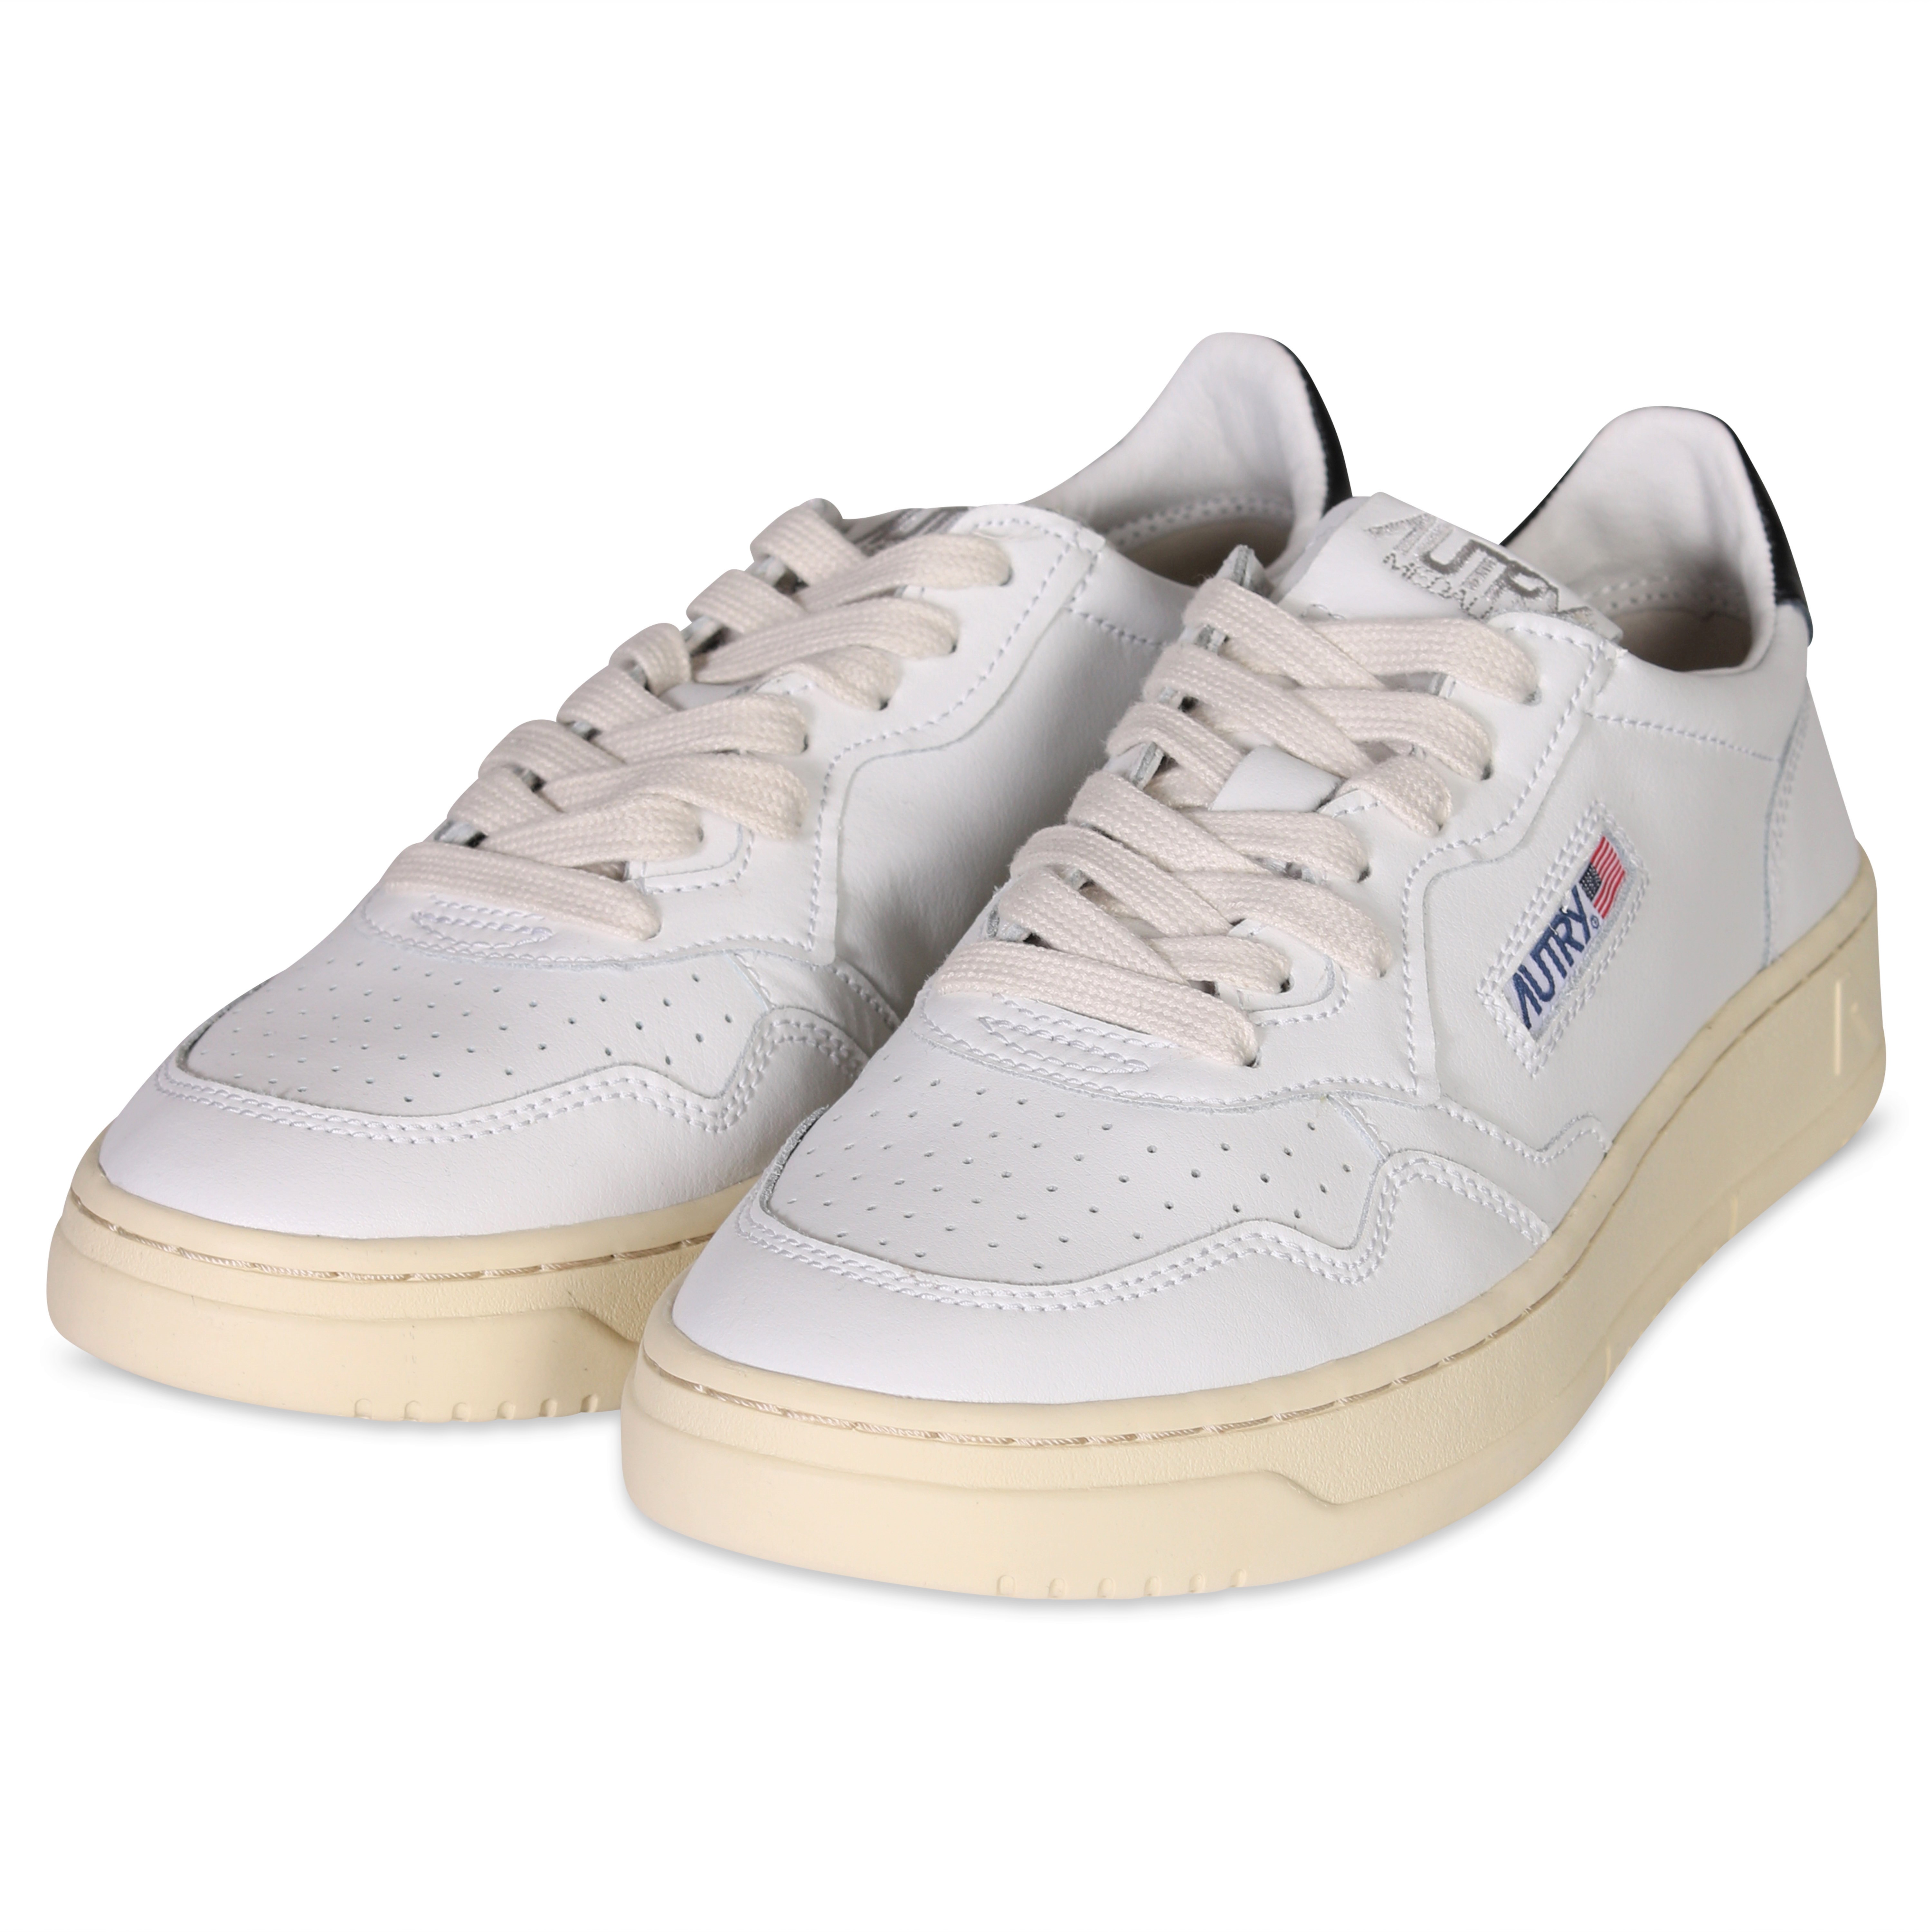 Autry Action Shoes Low Sneaker White/Black